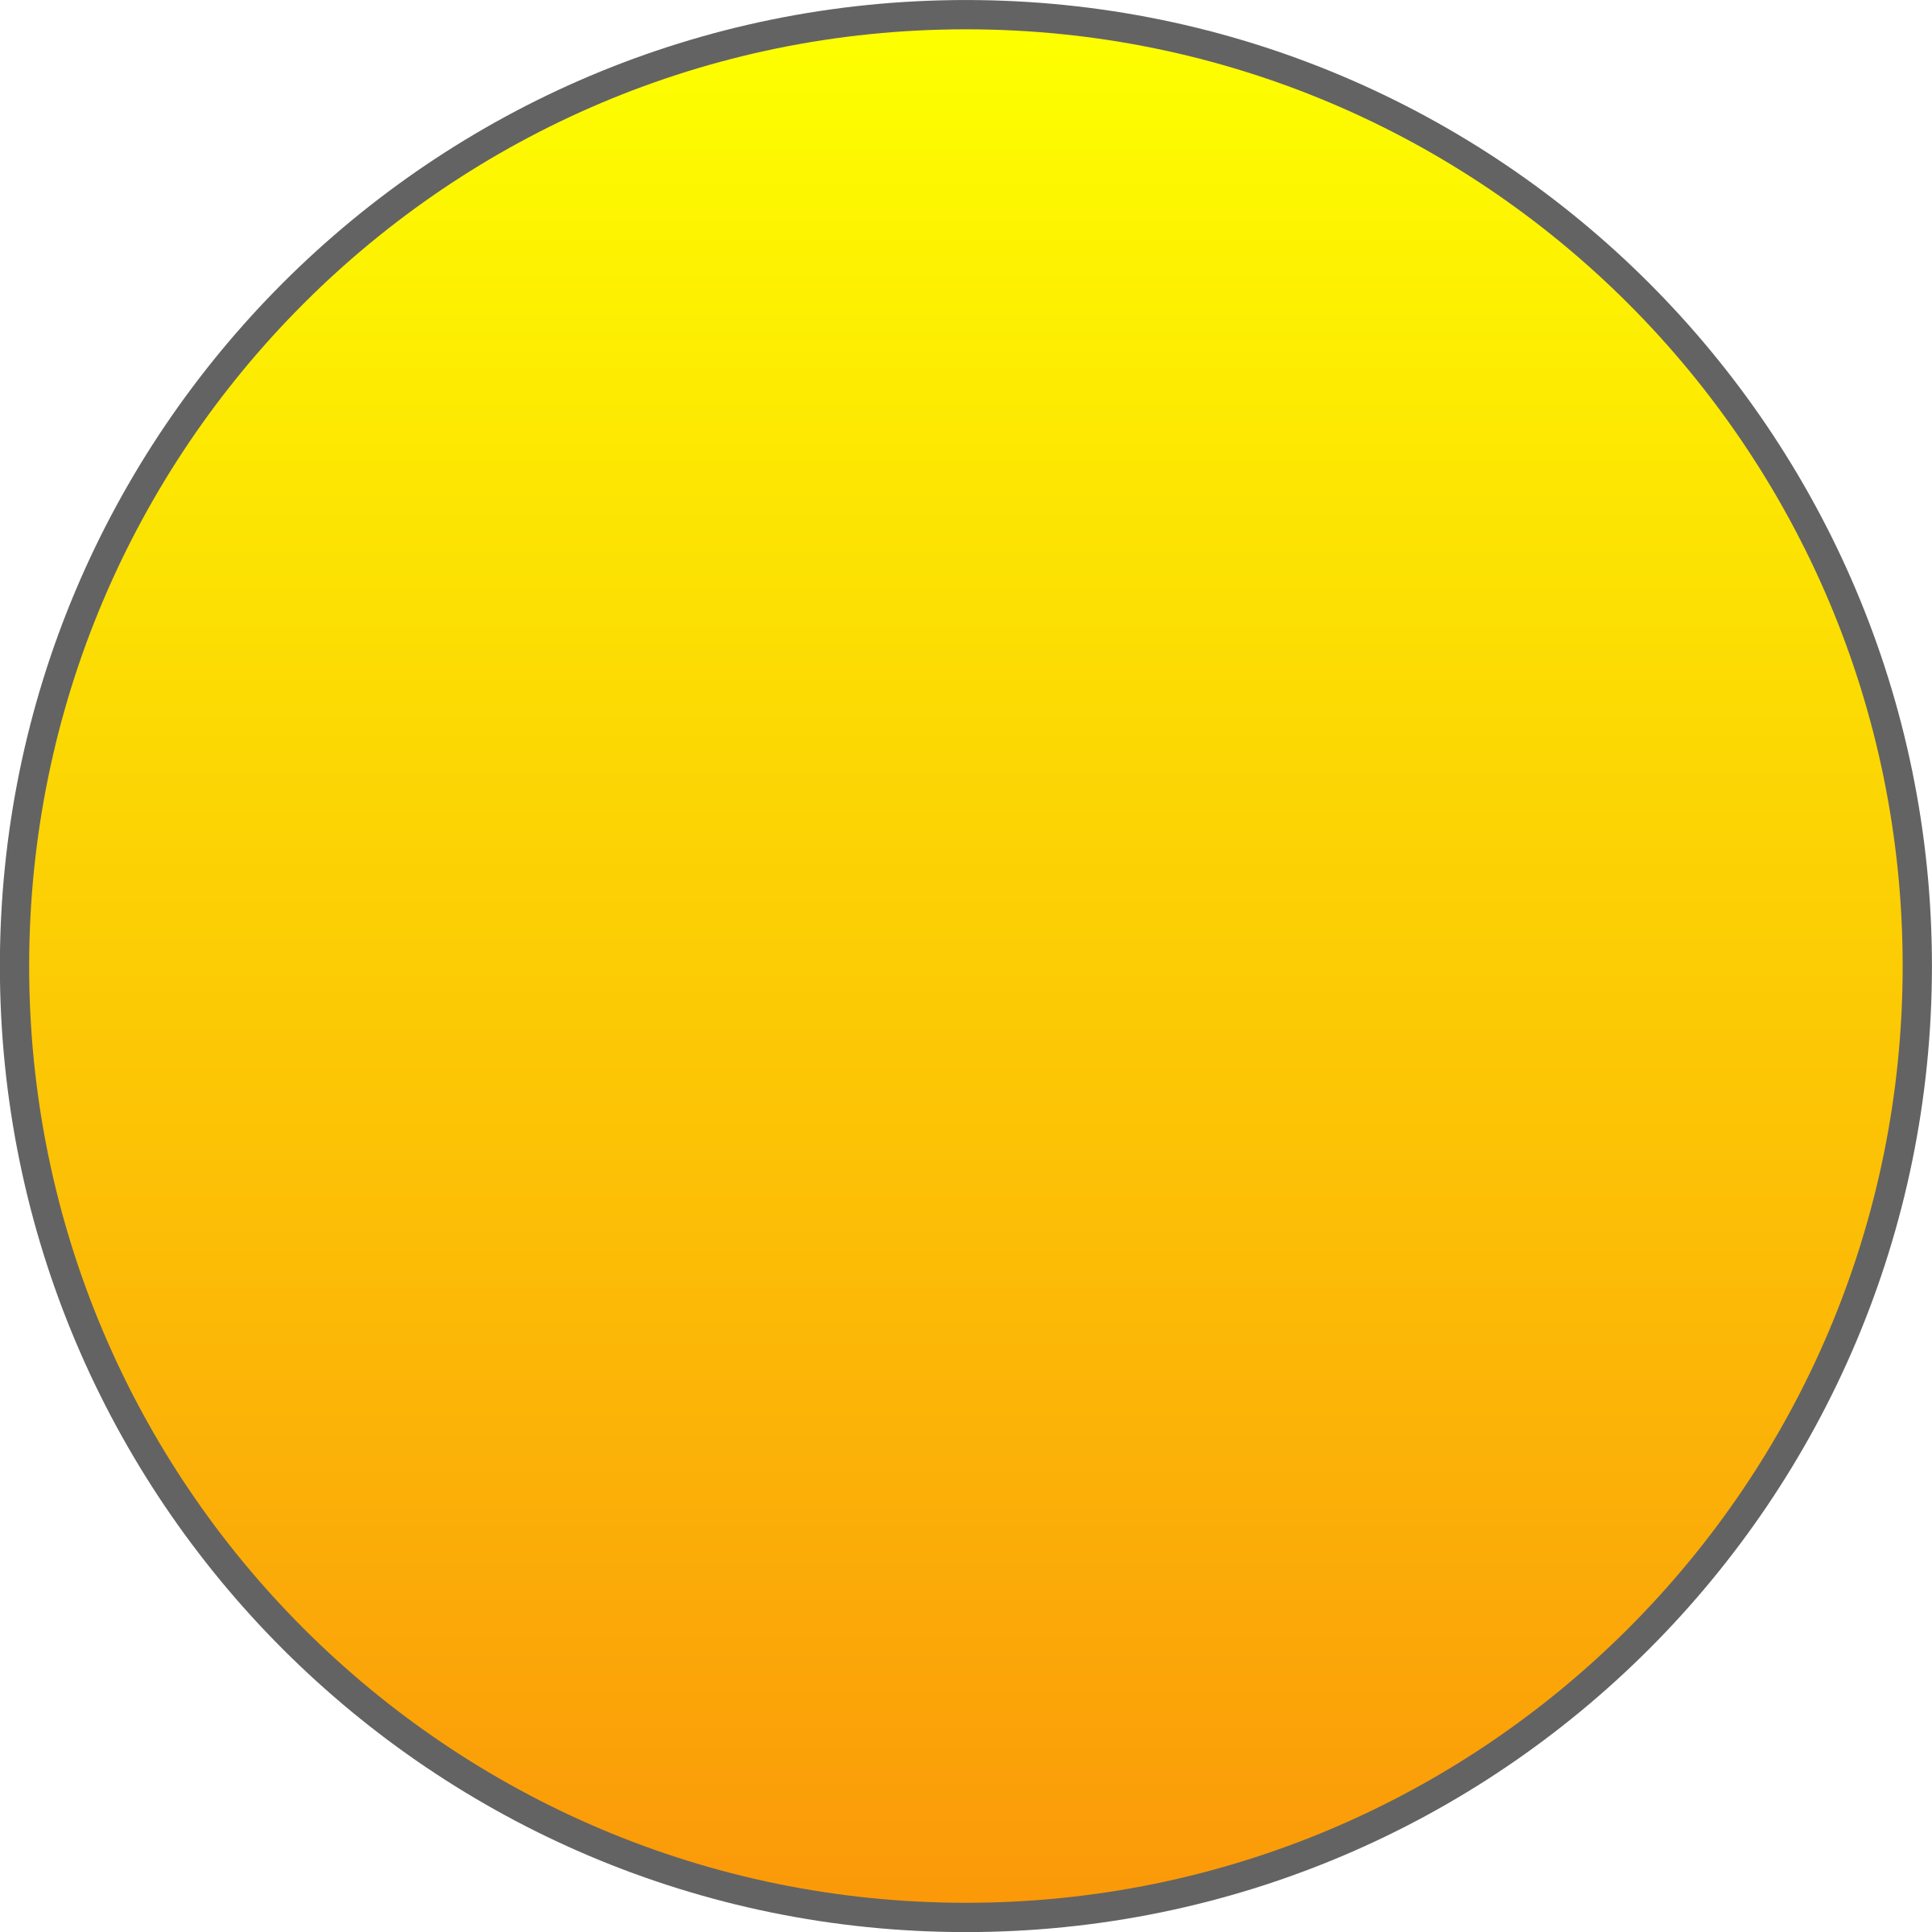 Clipart sun round, Clipart sun round Transparent FREE for ...